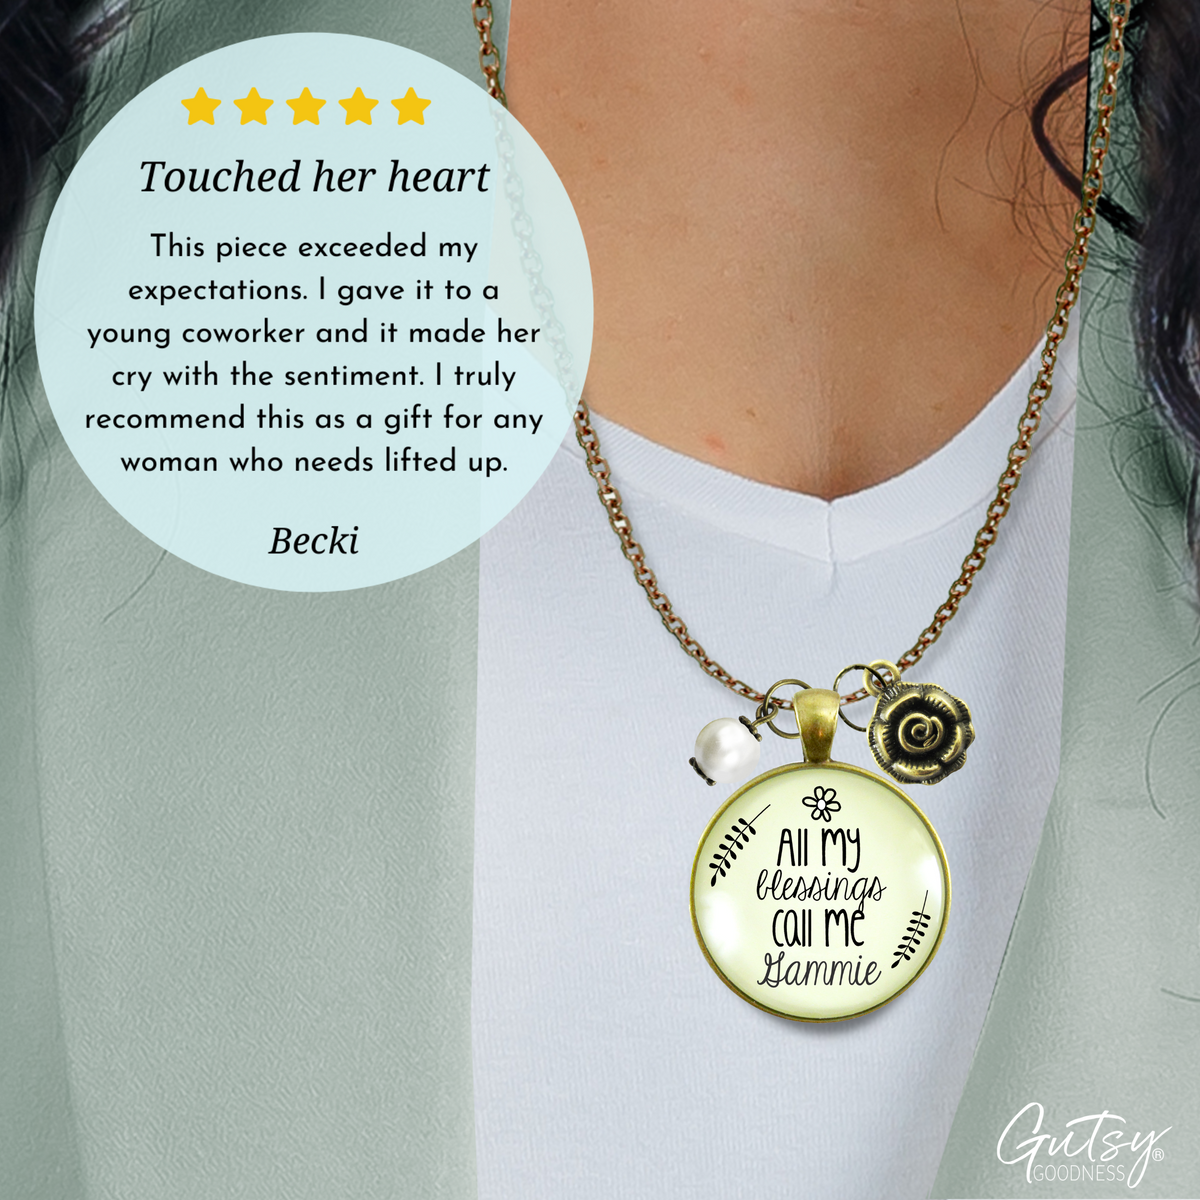 Gutsy Goodness Gammie Necklace All My Blessings Southern Grandma Gift Jewelry - Gutsy Goodness Handmade Jewelry;Gammie Necklace All My Blessings Southern Grandma Gift Jewelry - Gutsy Goodness Handmade Jewelry Gifts